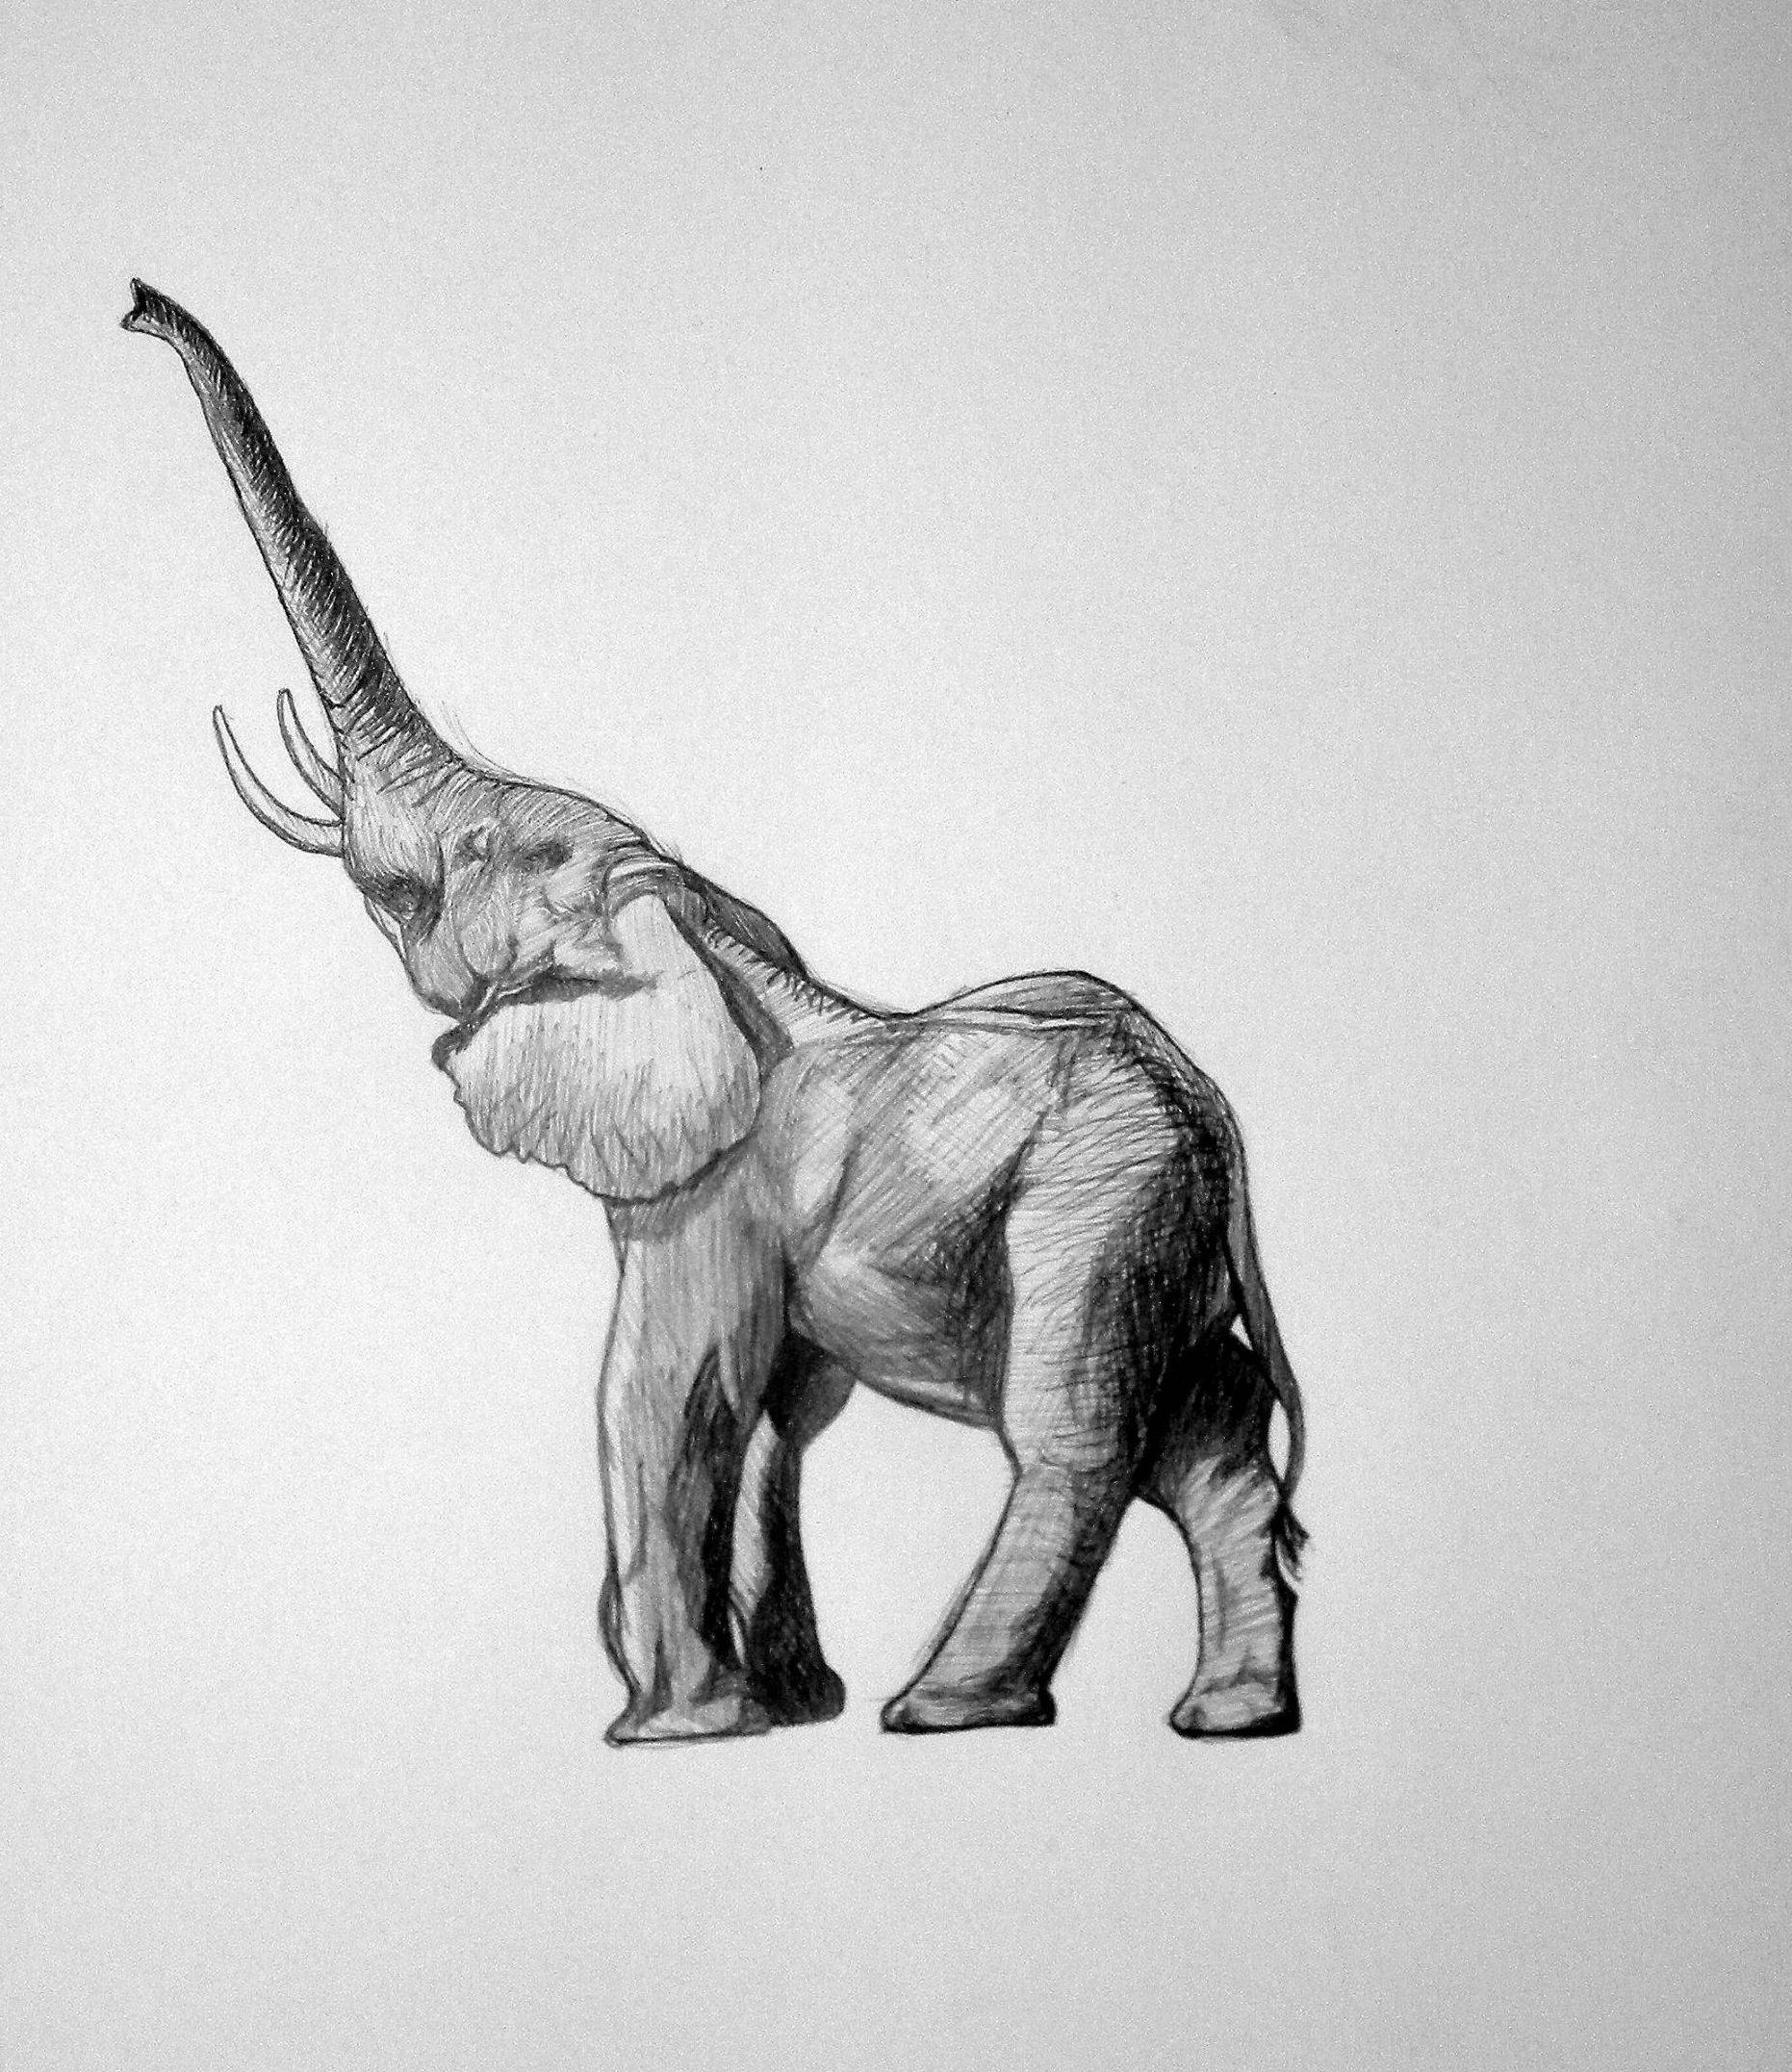 Amazoncom African Elephant Pen and Ink Art Print By Artist DJ Rogers  Posters  Prints